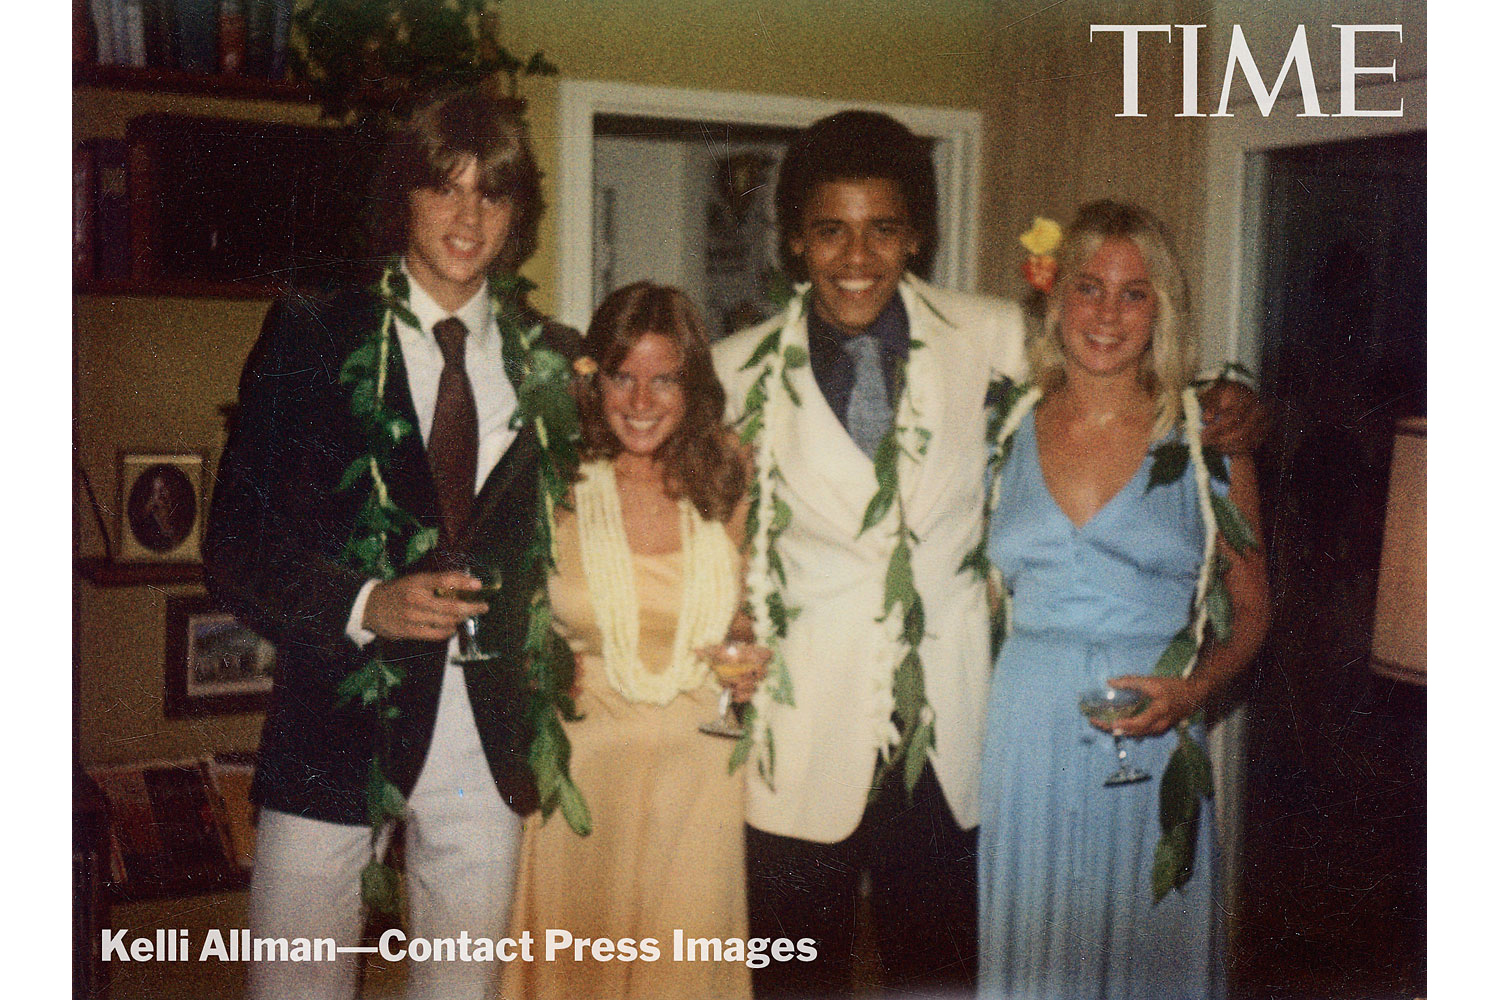 Barack Obama in an exclusive prom photo.